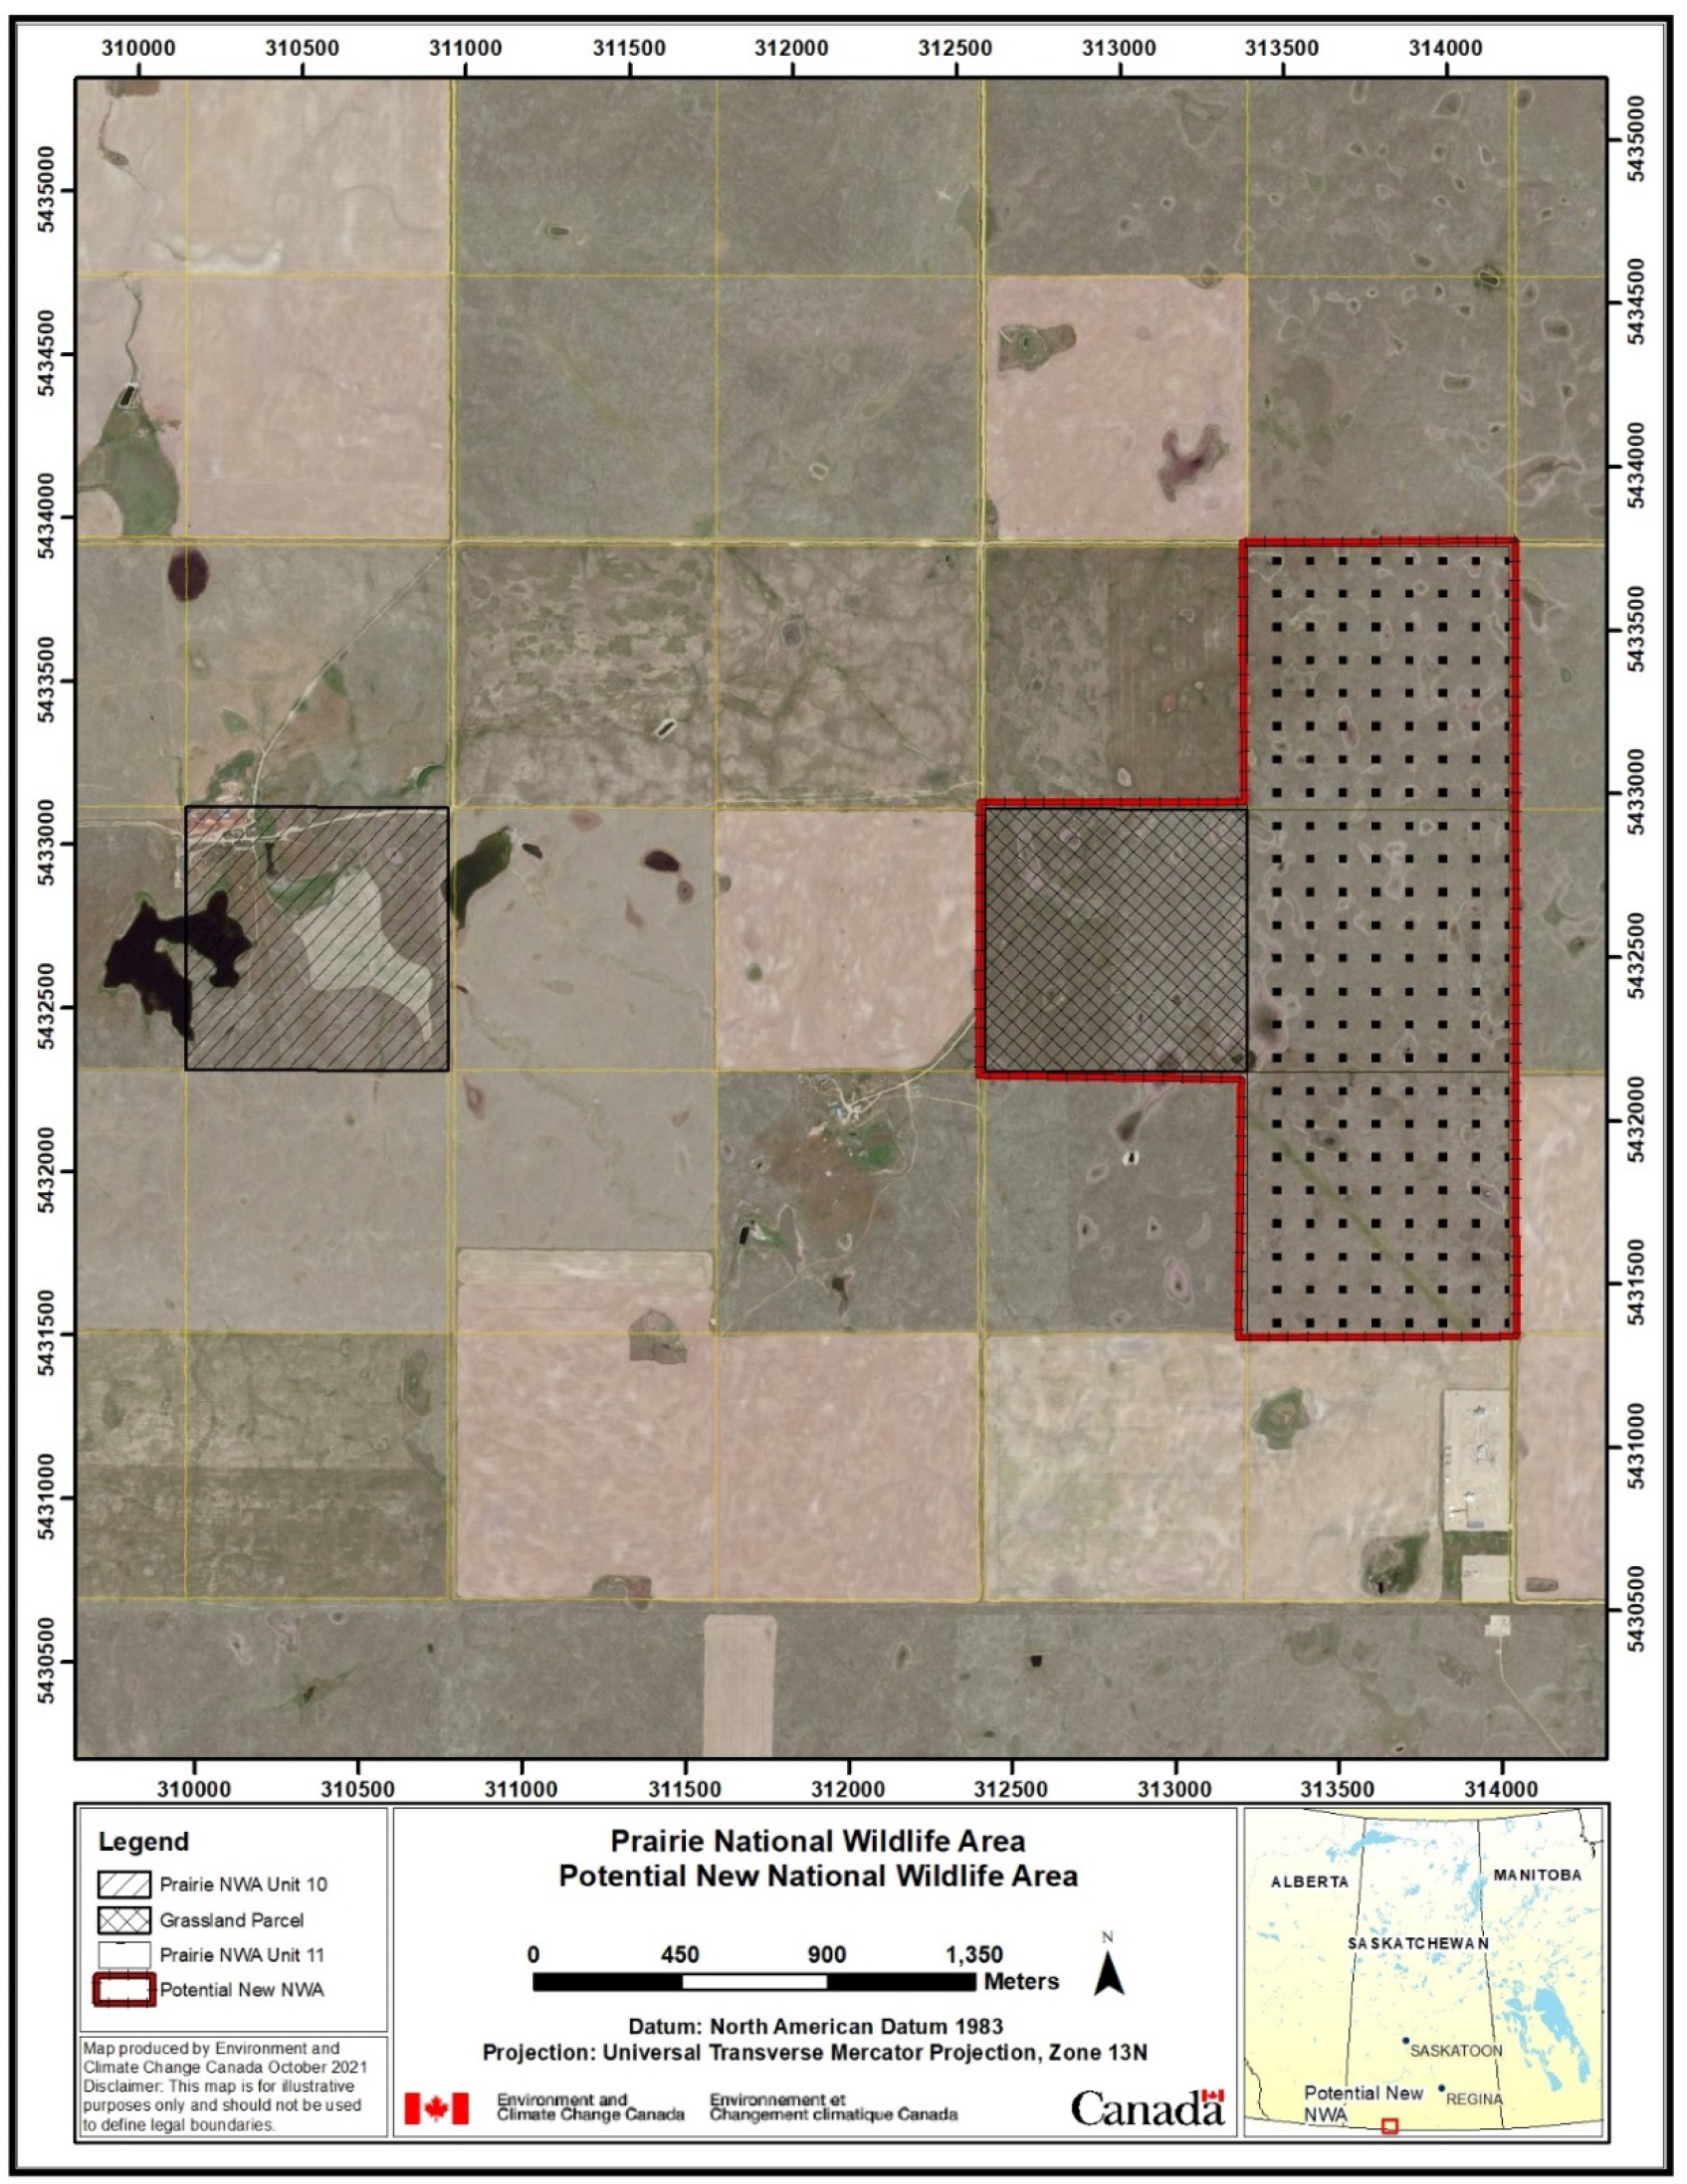 Figure 2. Aerial photograph showing locations and areas of unit 10 and unit 11 of the Prairie National Wildlife Area and of the potential new National Wildlife Area  – Text version below the image